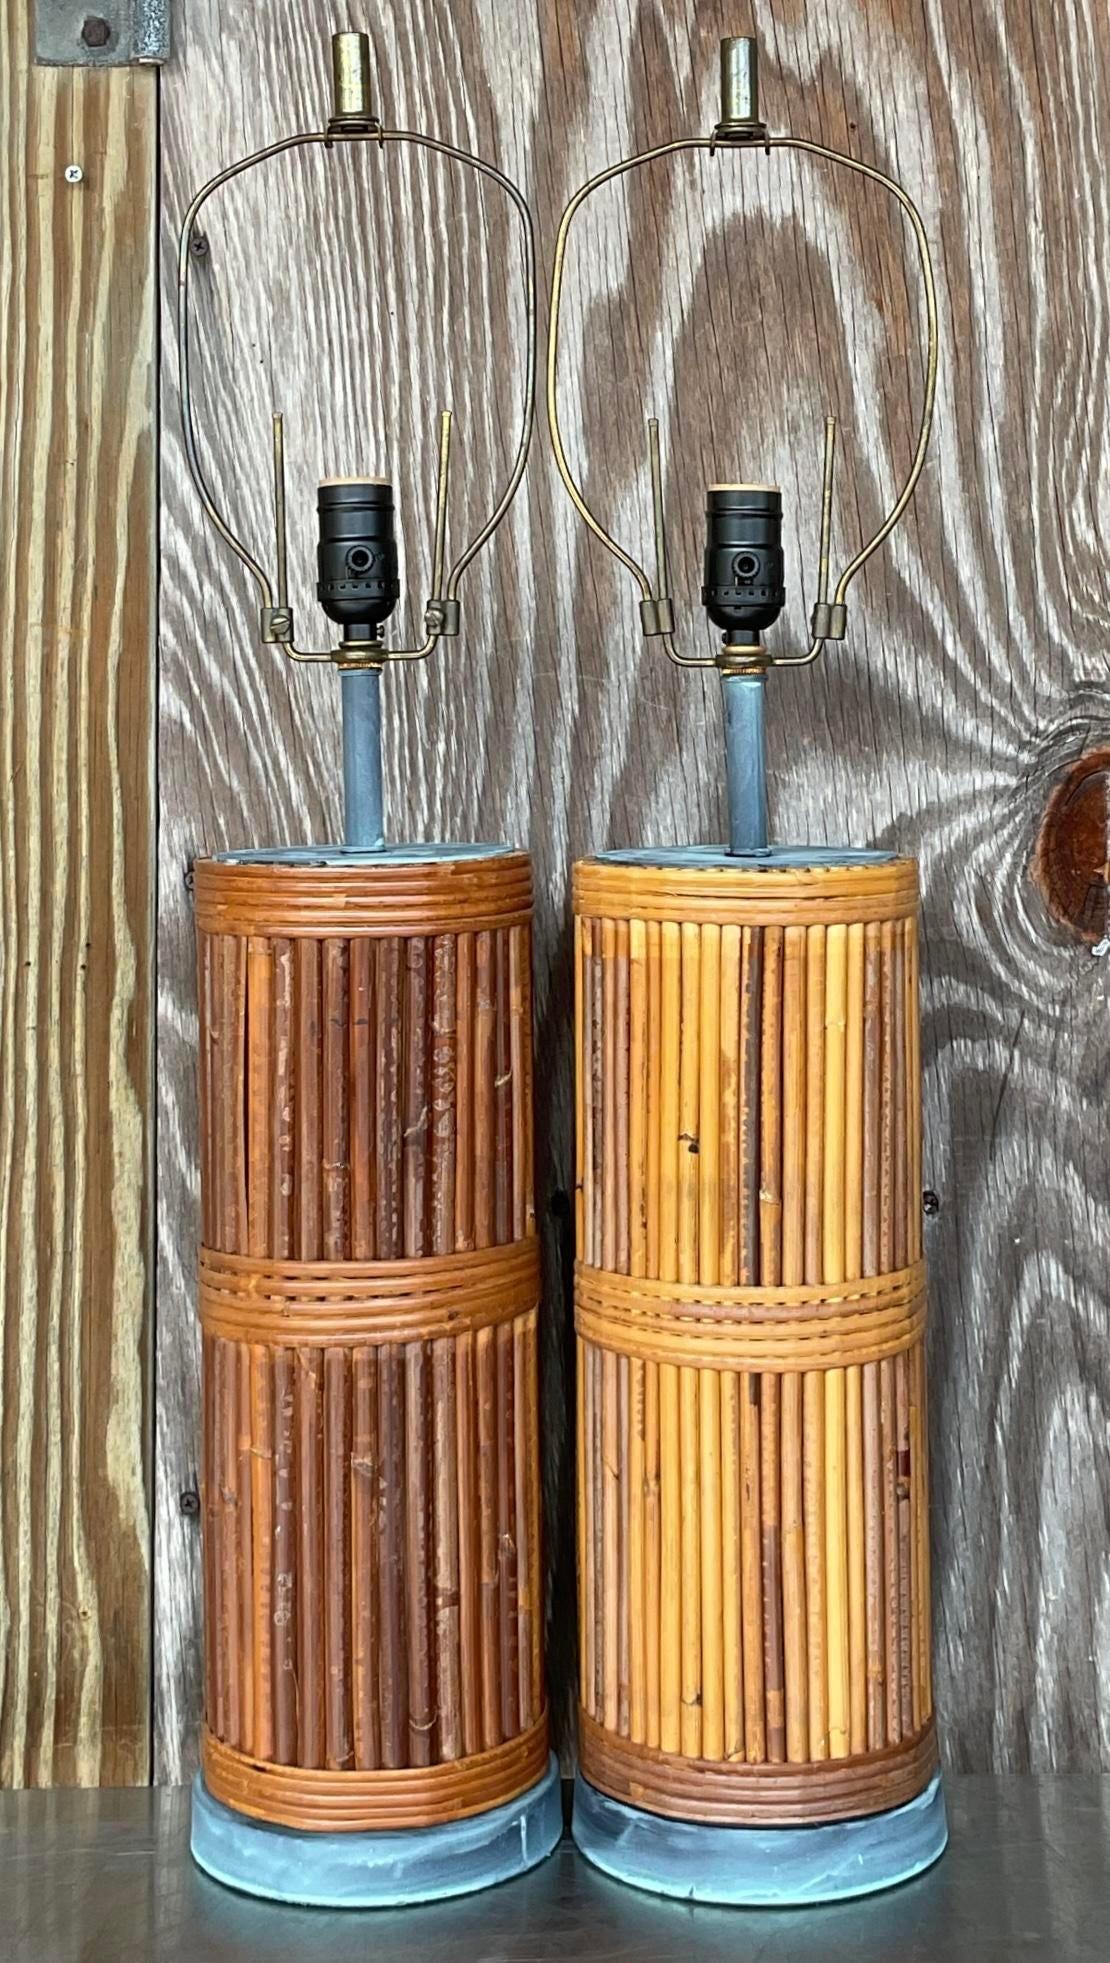 Illuminate your space with coastal charm using this pair of Vintage Pencil Reed Table Lamps. Inspired by classic American coastal aesthetics, these lamps exude a timeless allure with their intricate woven design and natural materials. Perfect for